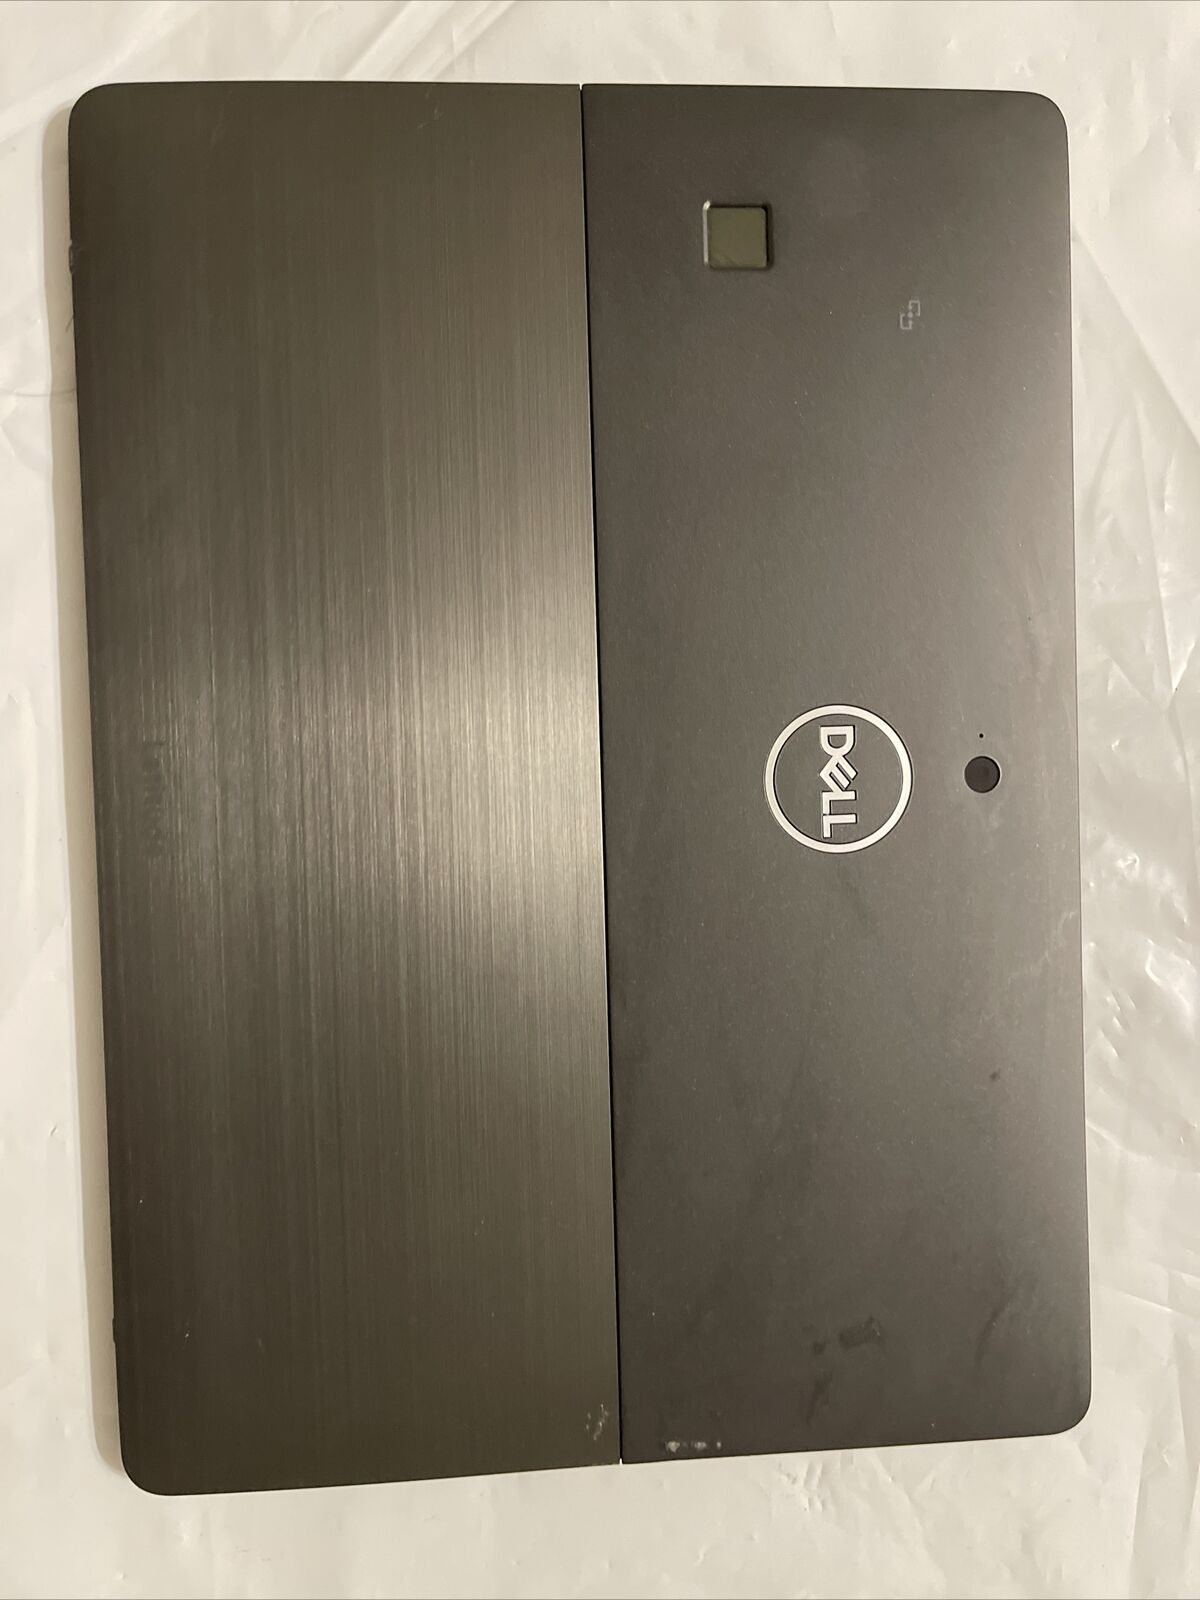 Genuine Dell Latitude 5290 2-in-1 Laptop LCD BACK Cover LID W Speakers 65X39 B9